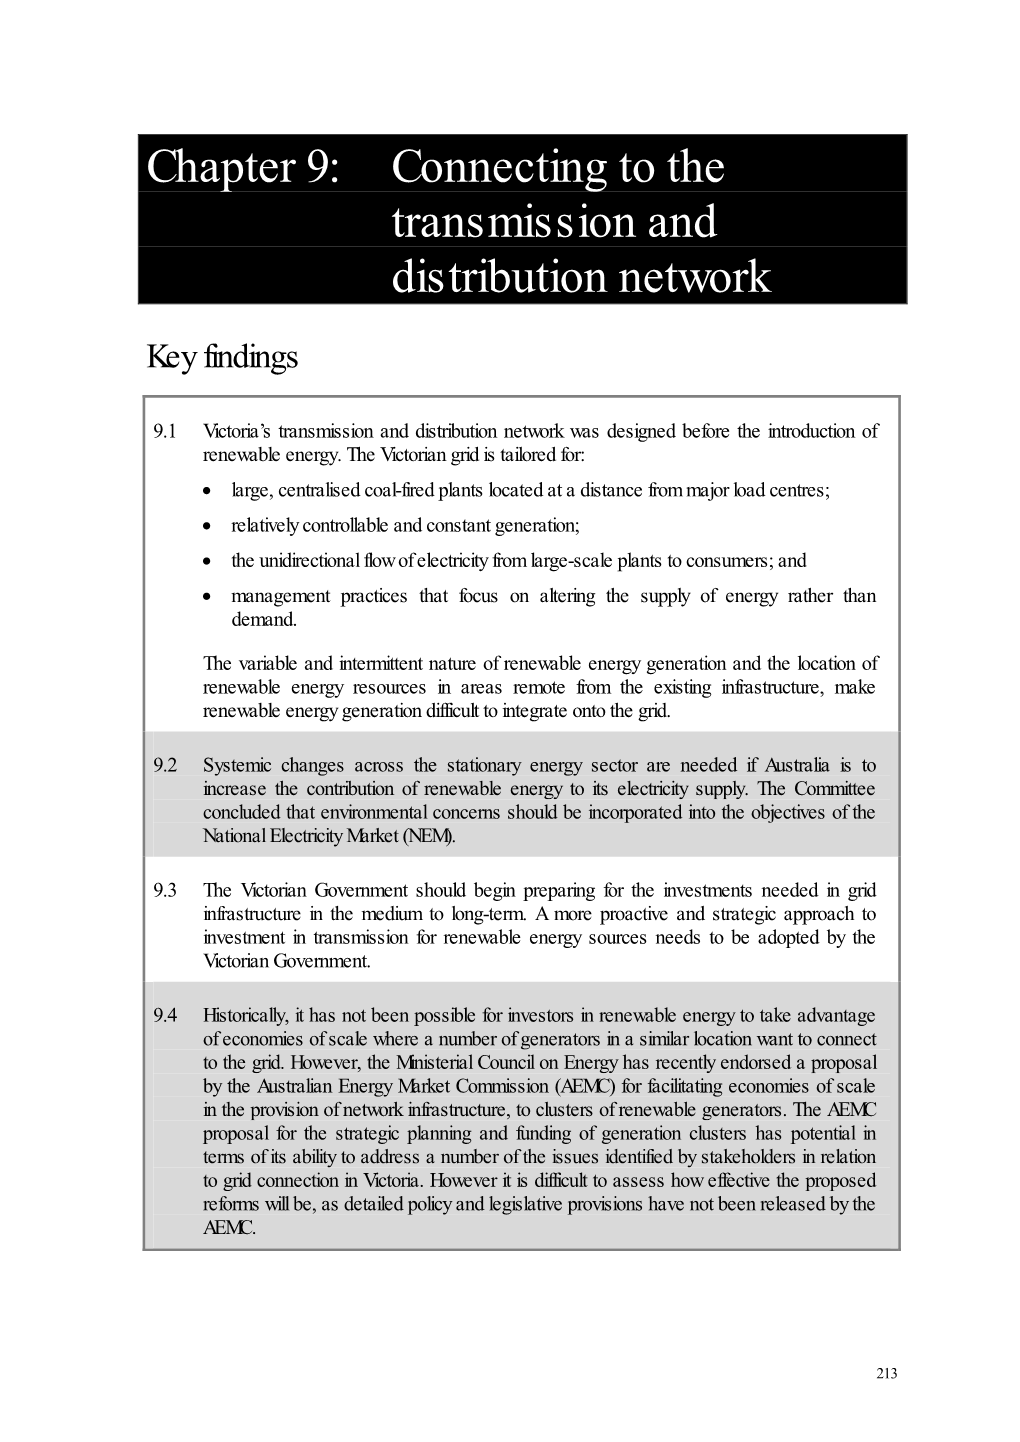 Connecting to the Transmission and Distribution Network